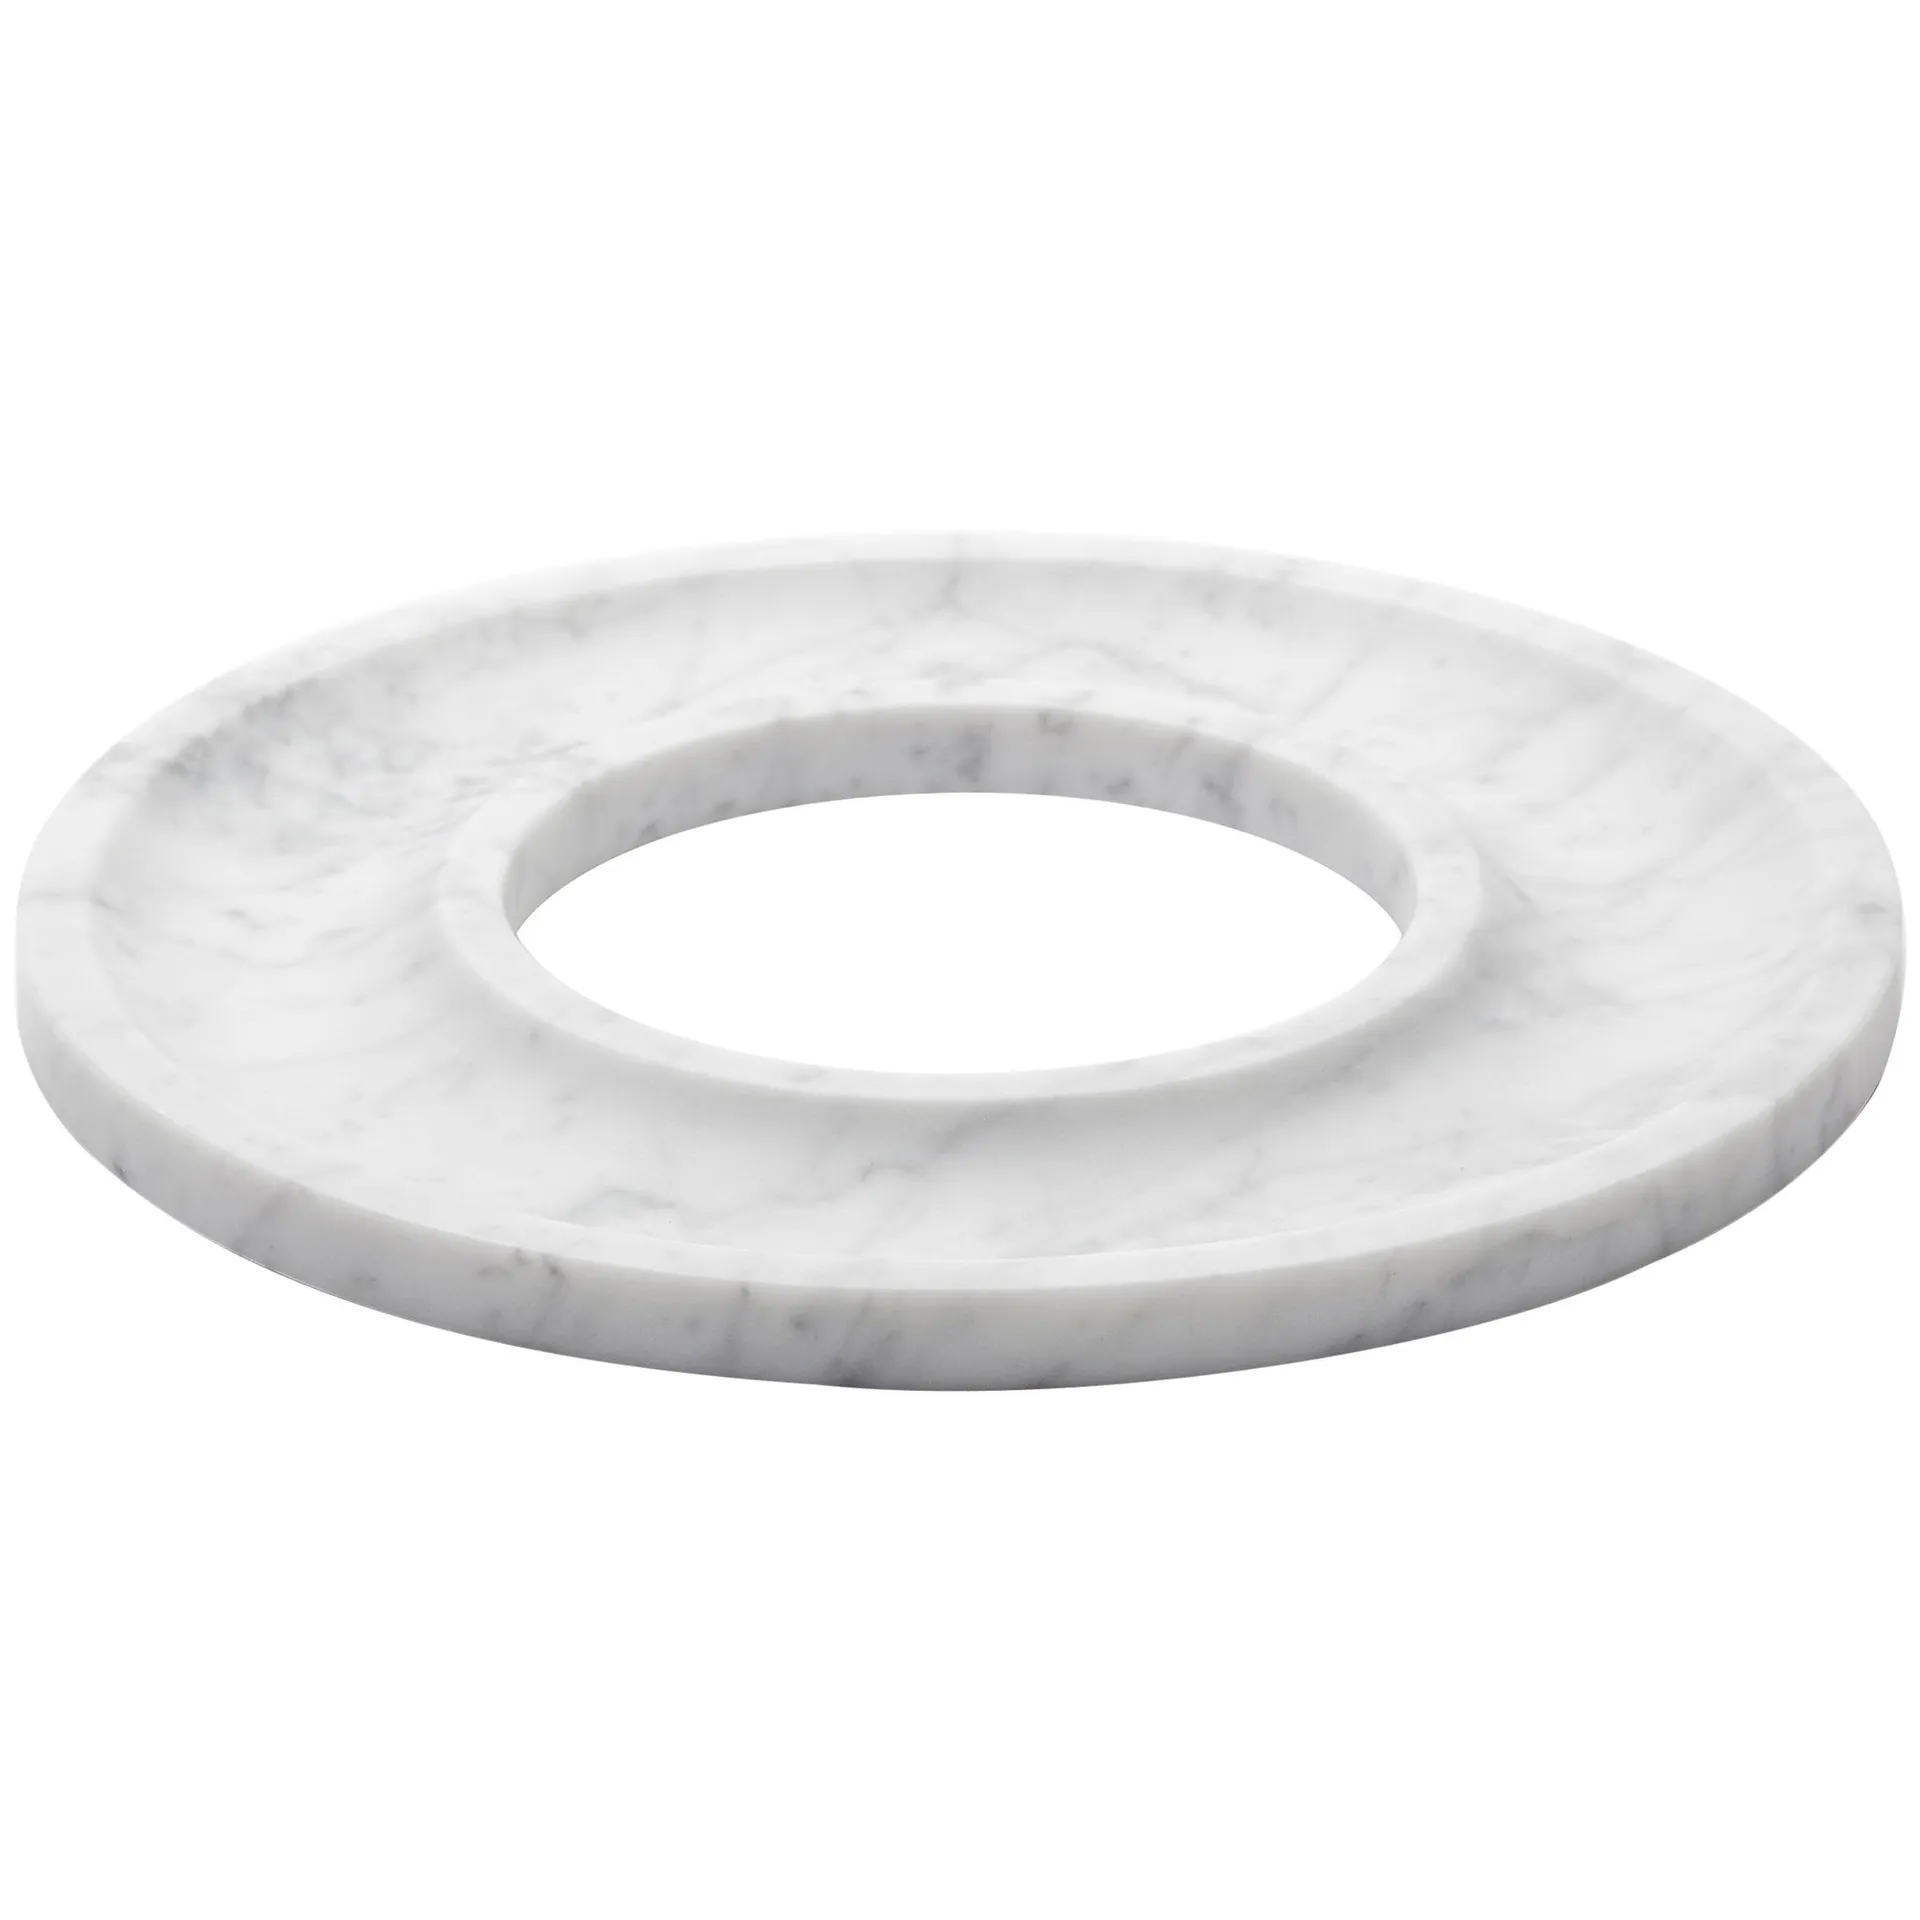 “Marblelous Ring Tray” White Carrara Marble Minimalist Tray by Aparentment